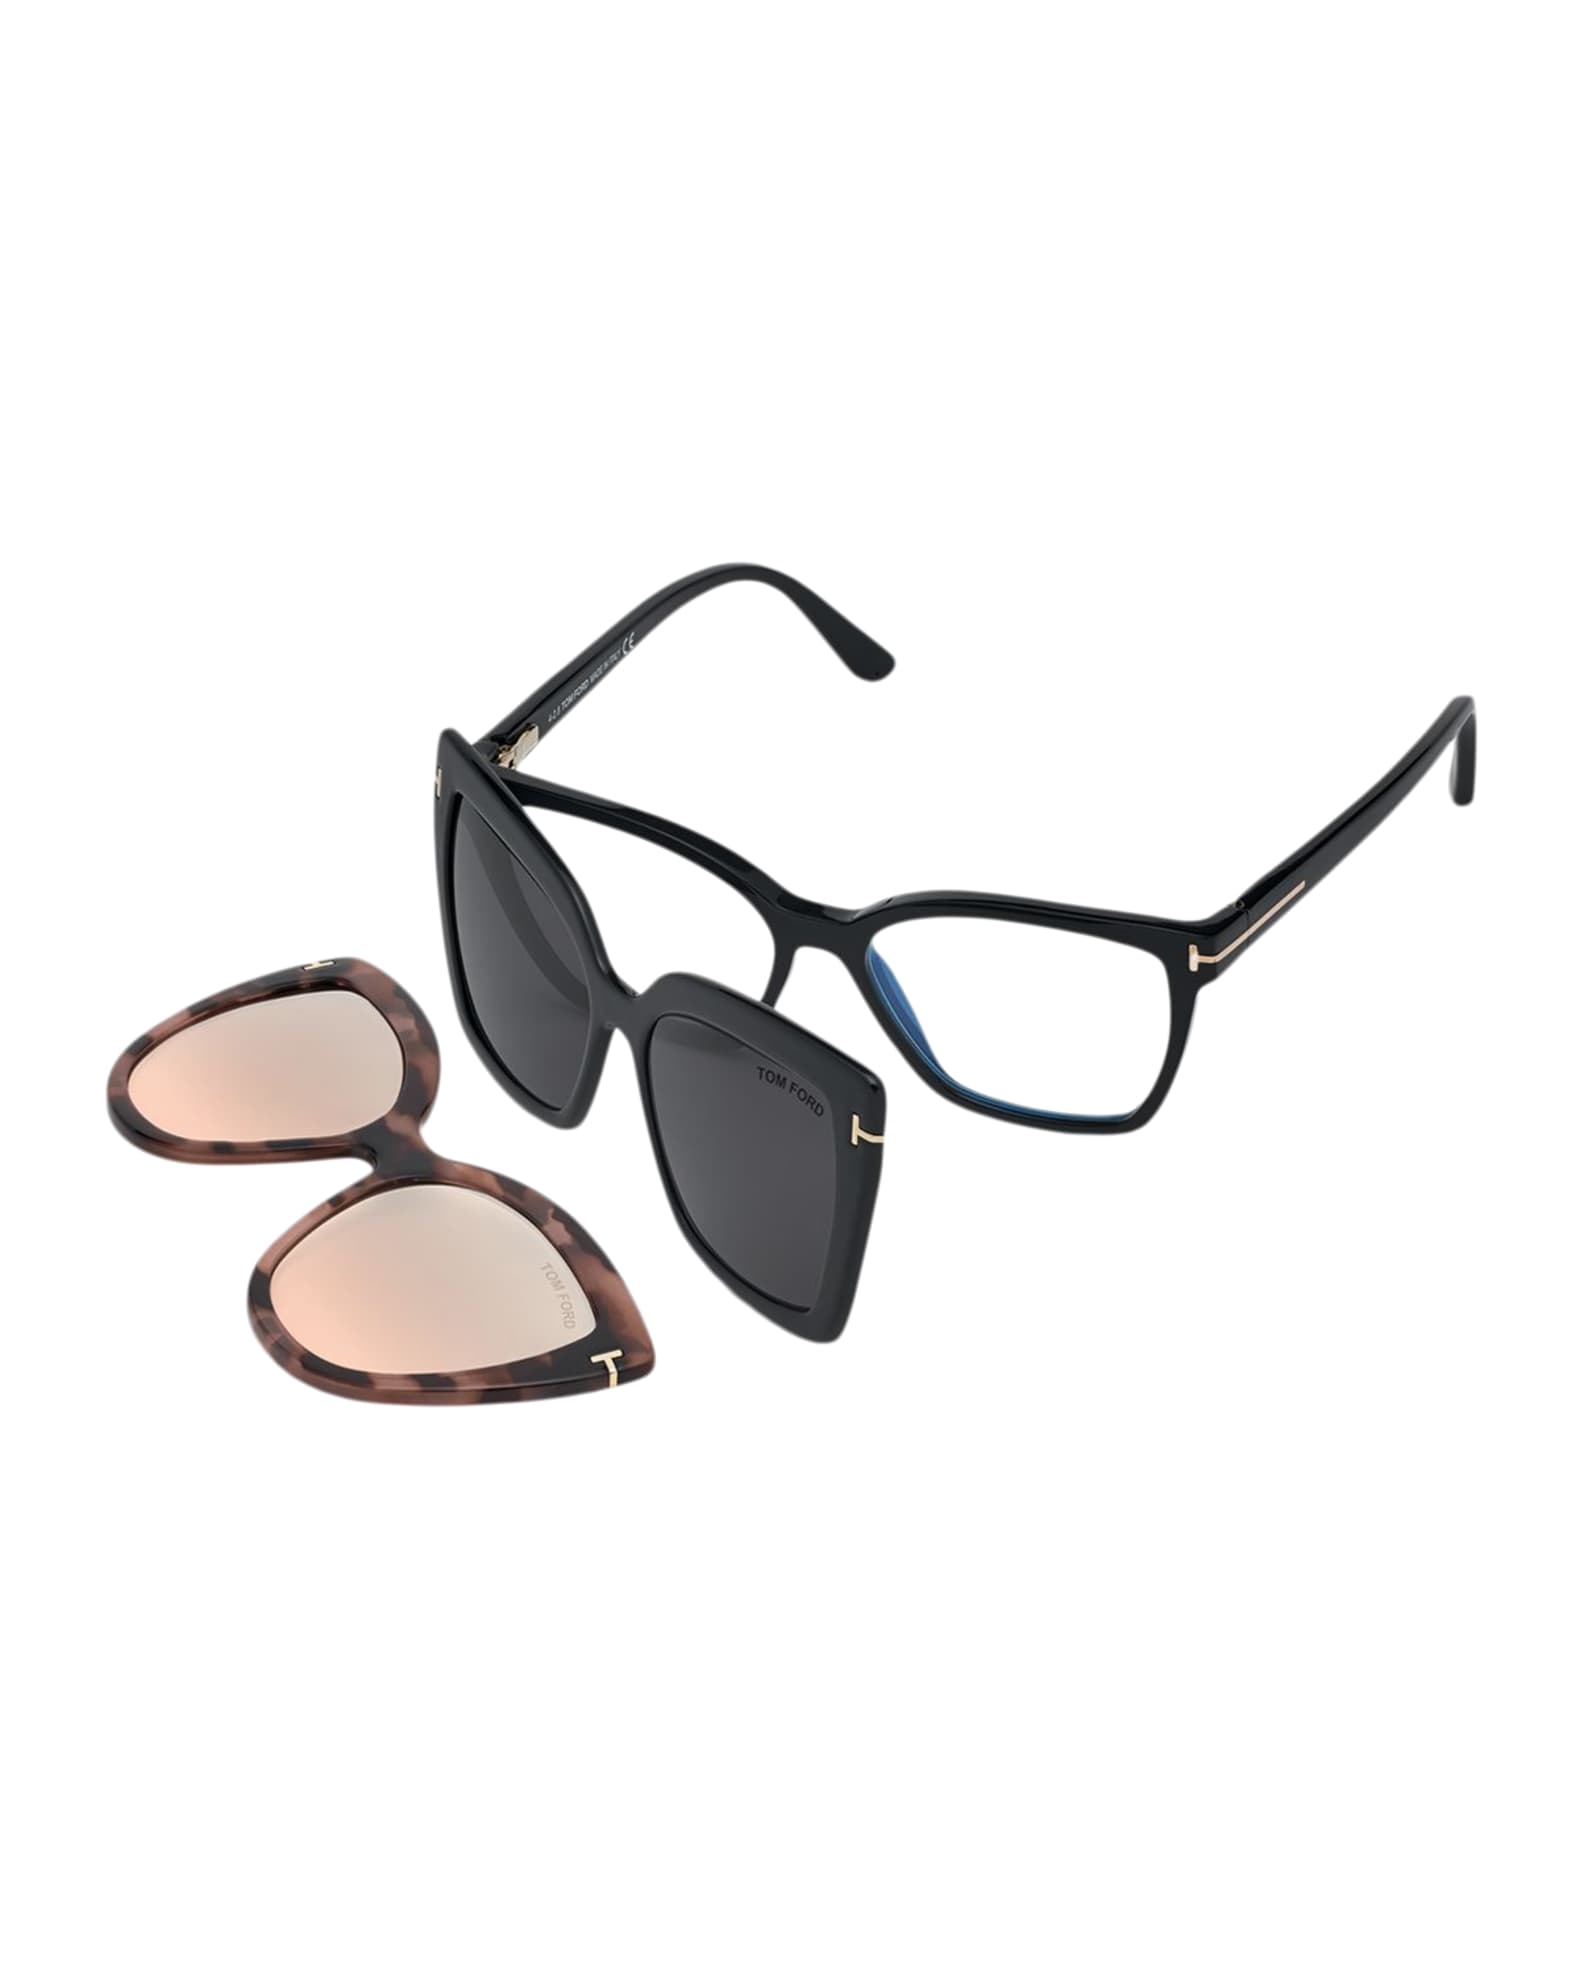 TOM FORD Square Blue-Block Optical Frames w/ Two Magnetic Sunglasses Clips  | Neiman Marcus